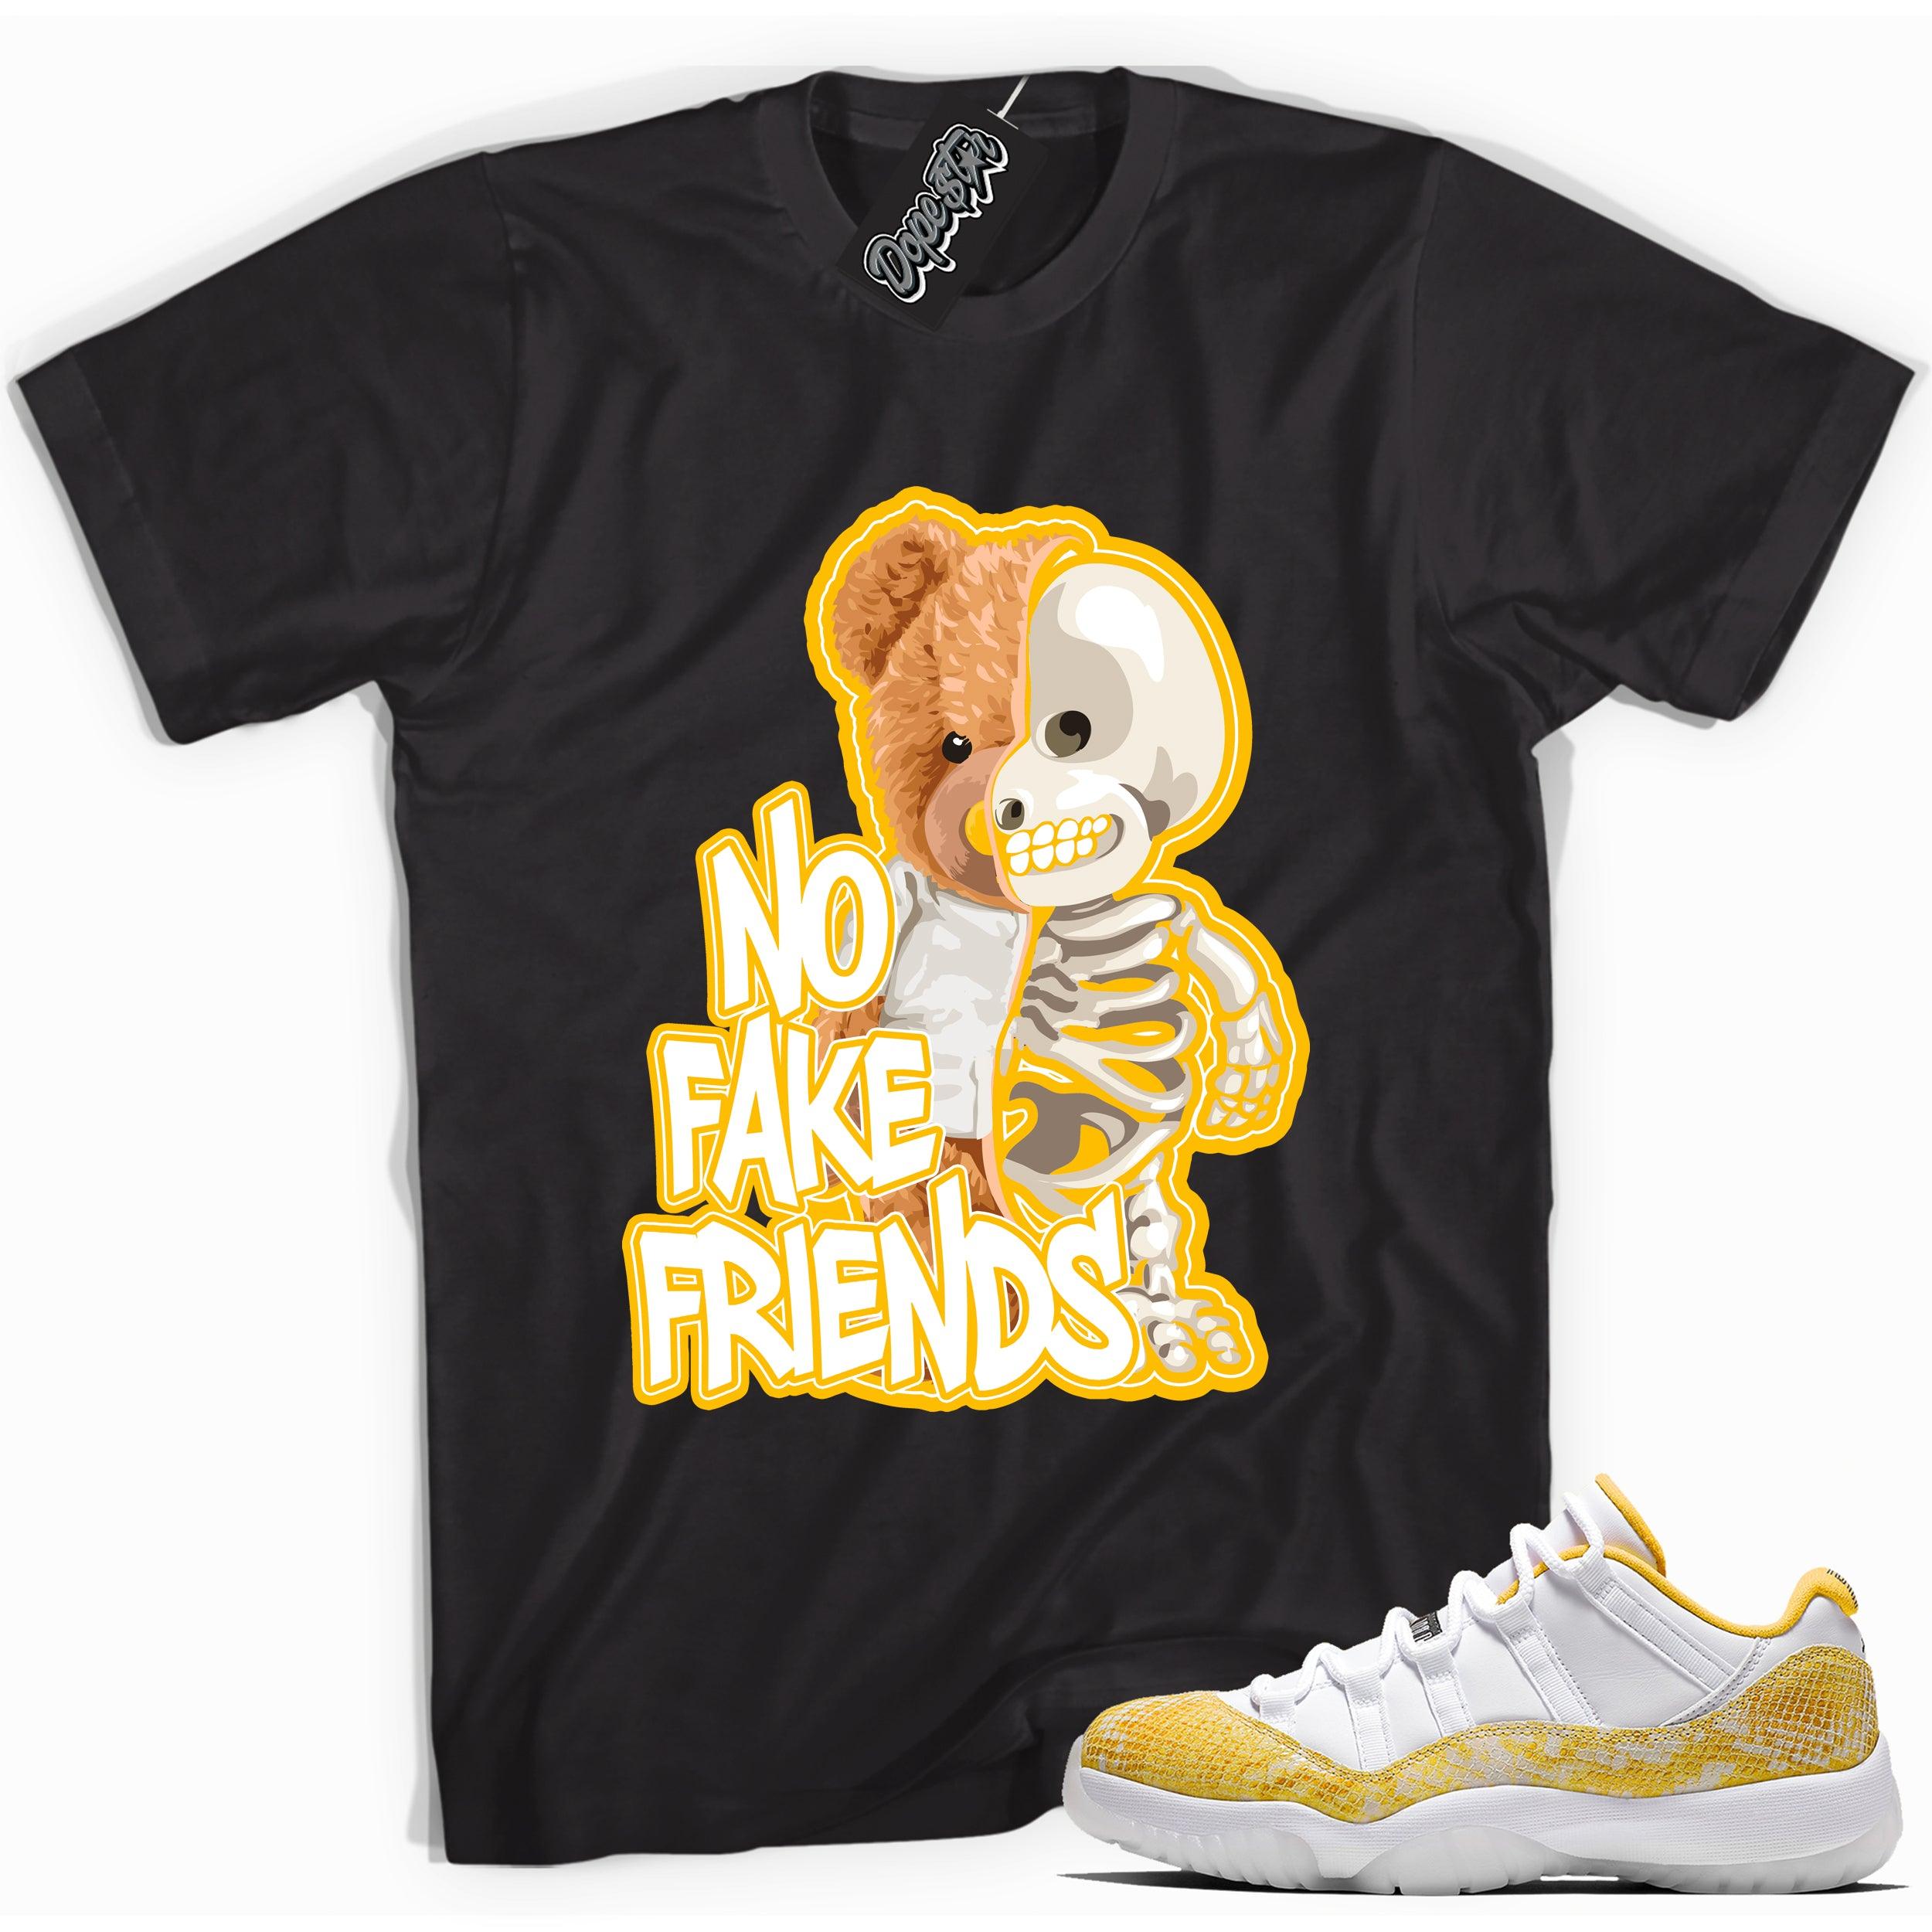 Cool black graphic tee with 'no fake friends' print, that perfectly matches  Air Jordan 11 Low Yellow Snakeskin sneakers